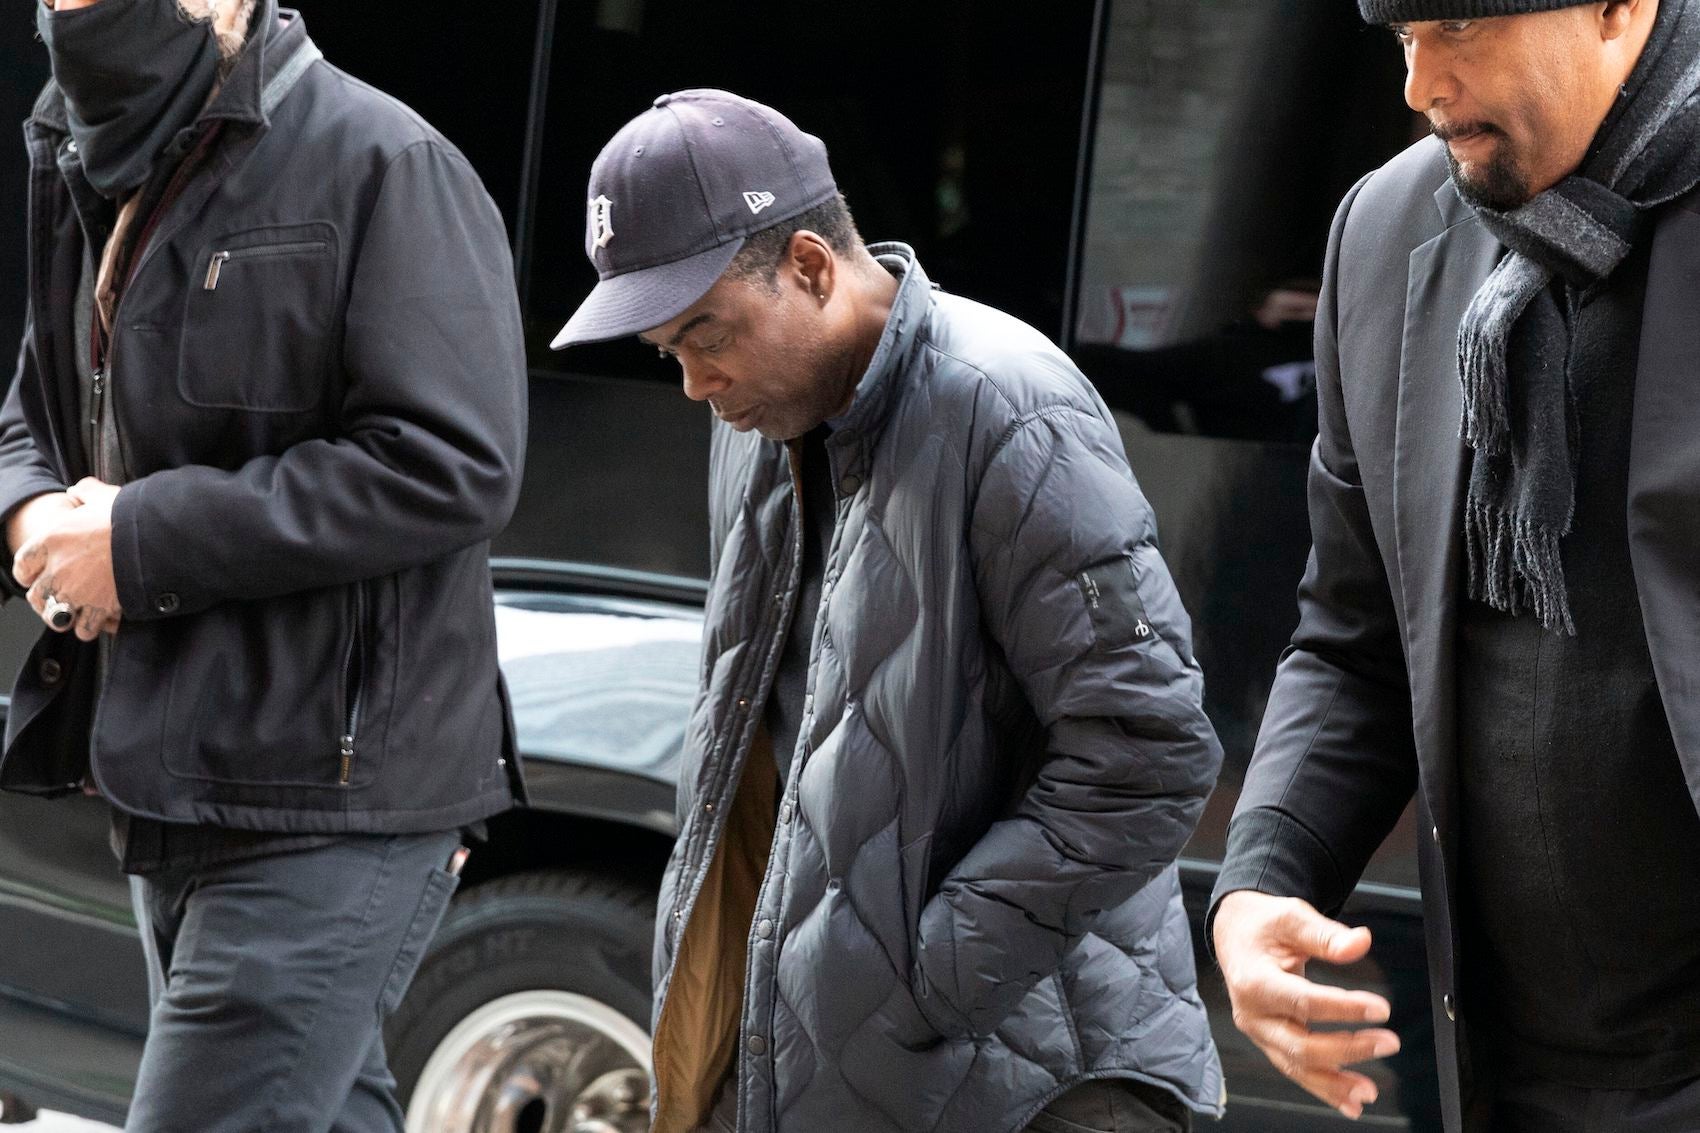 Chris Rock arrives at the Wilbur Theatre before performing in Boston Wednesday night.